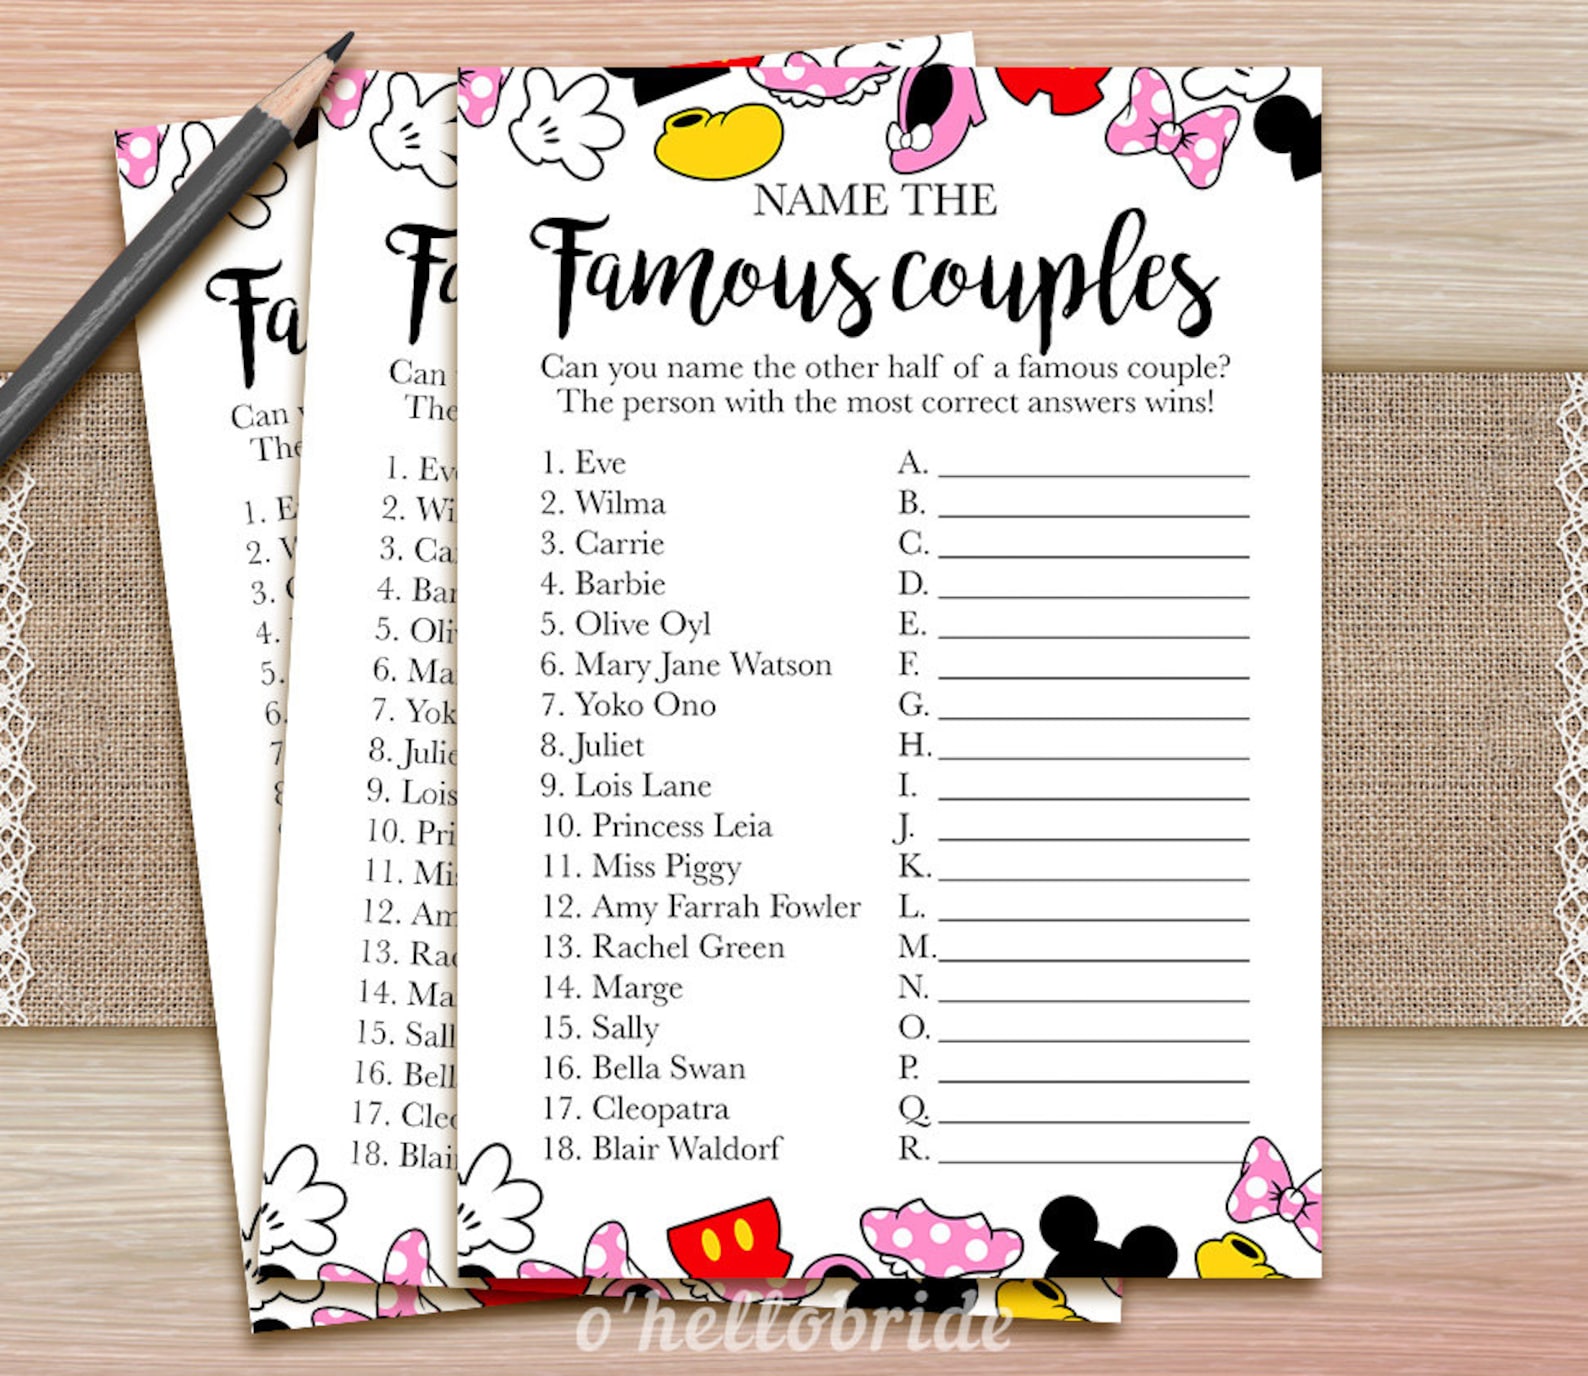 name-the-famous-couple-game-printable-disney-bridal-shower-etsy